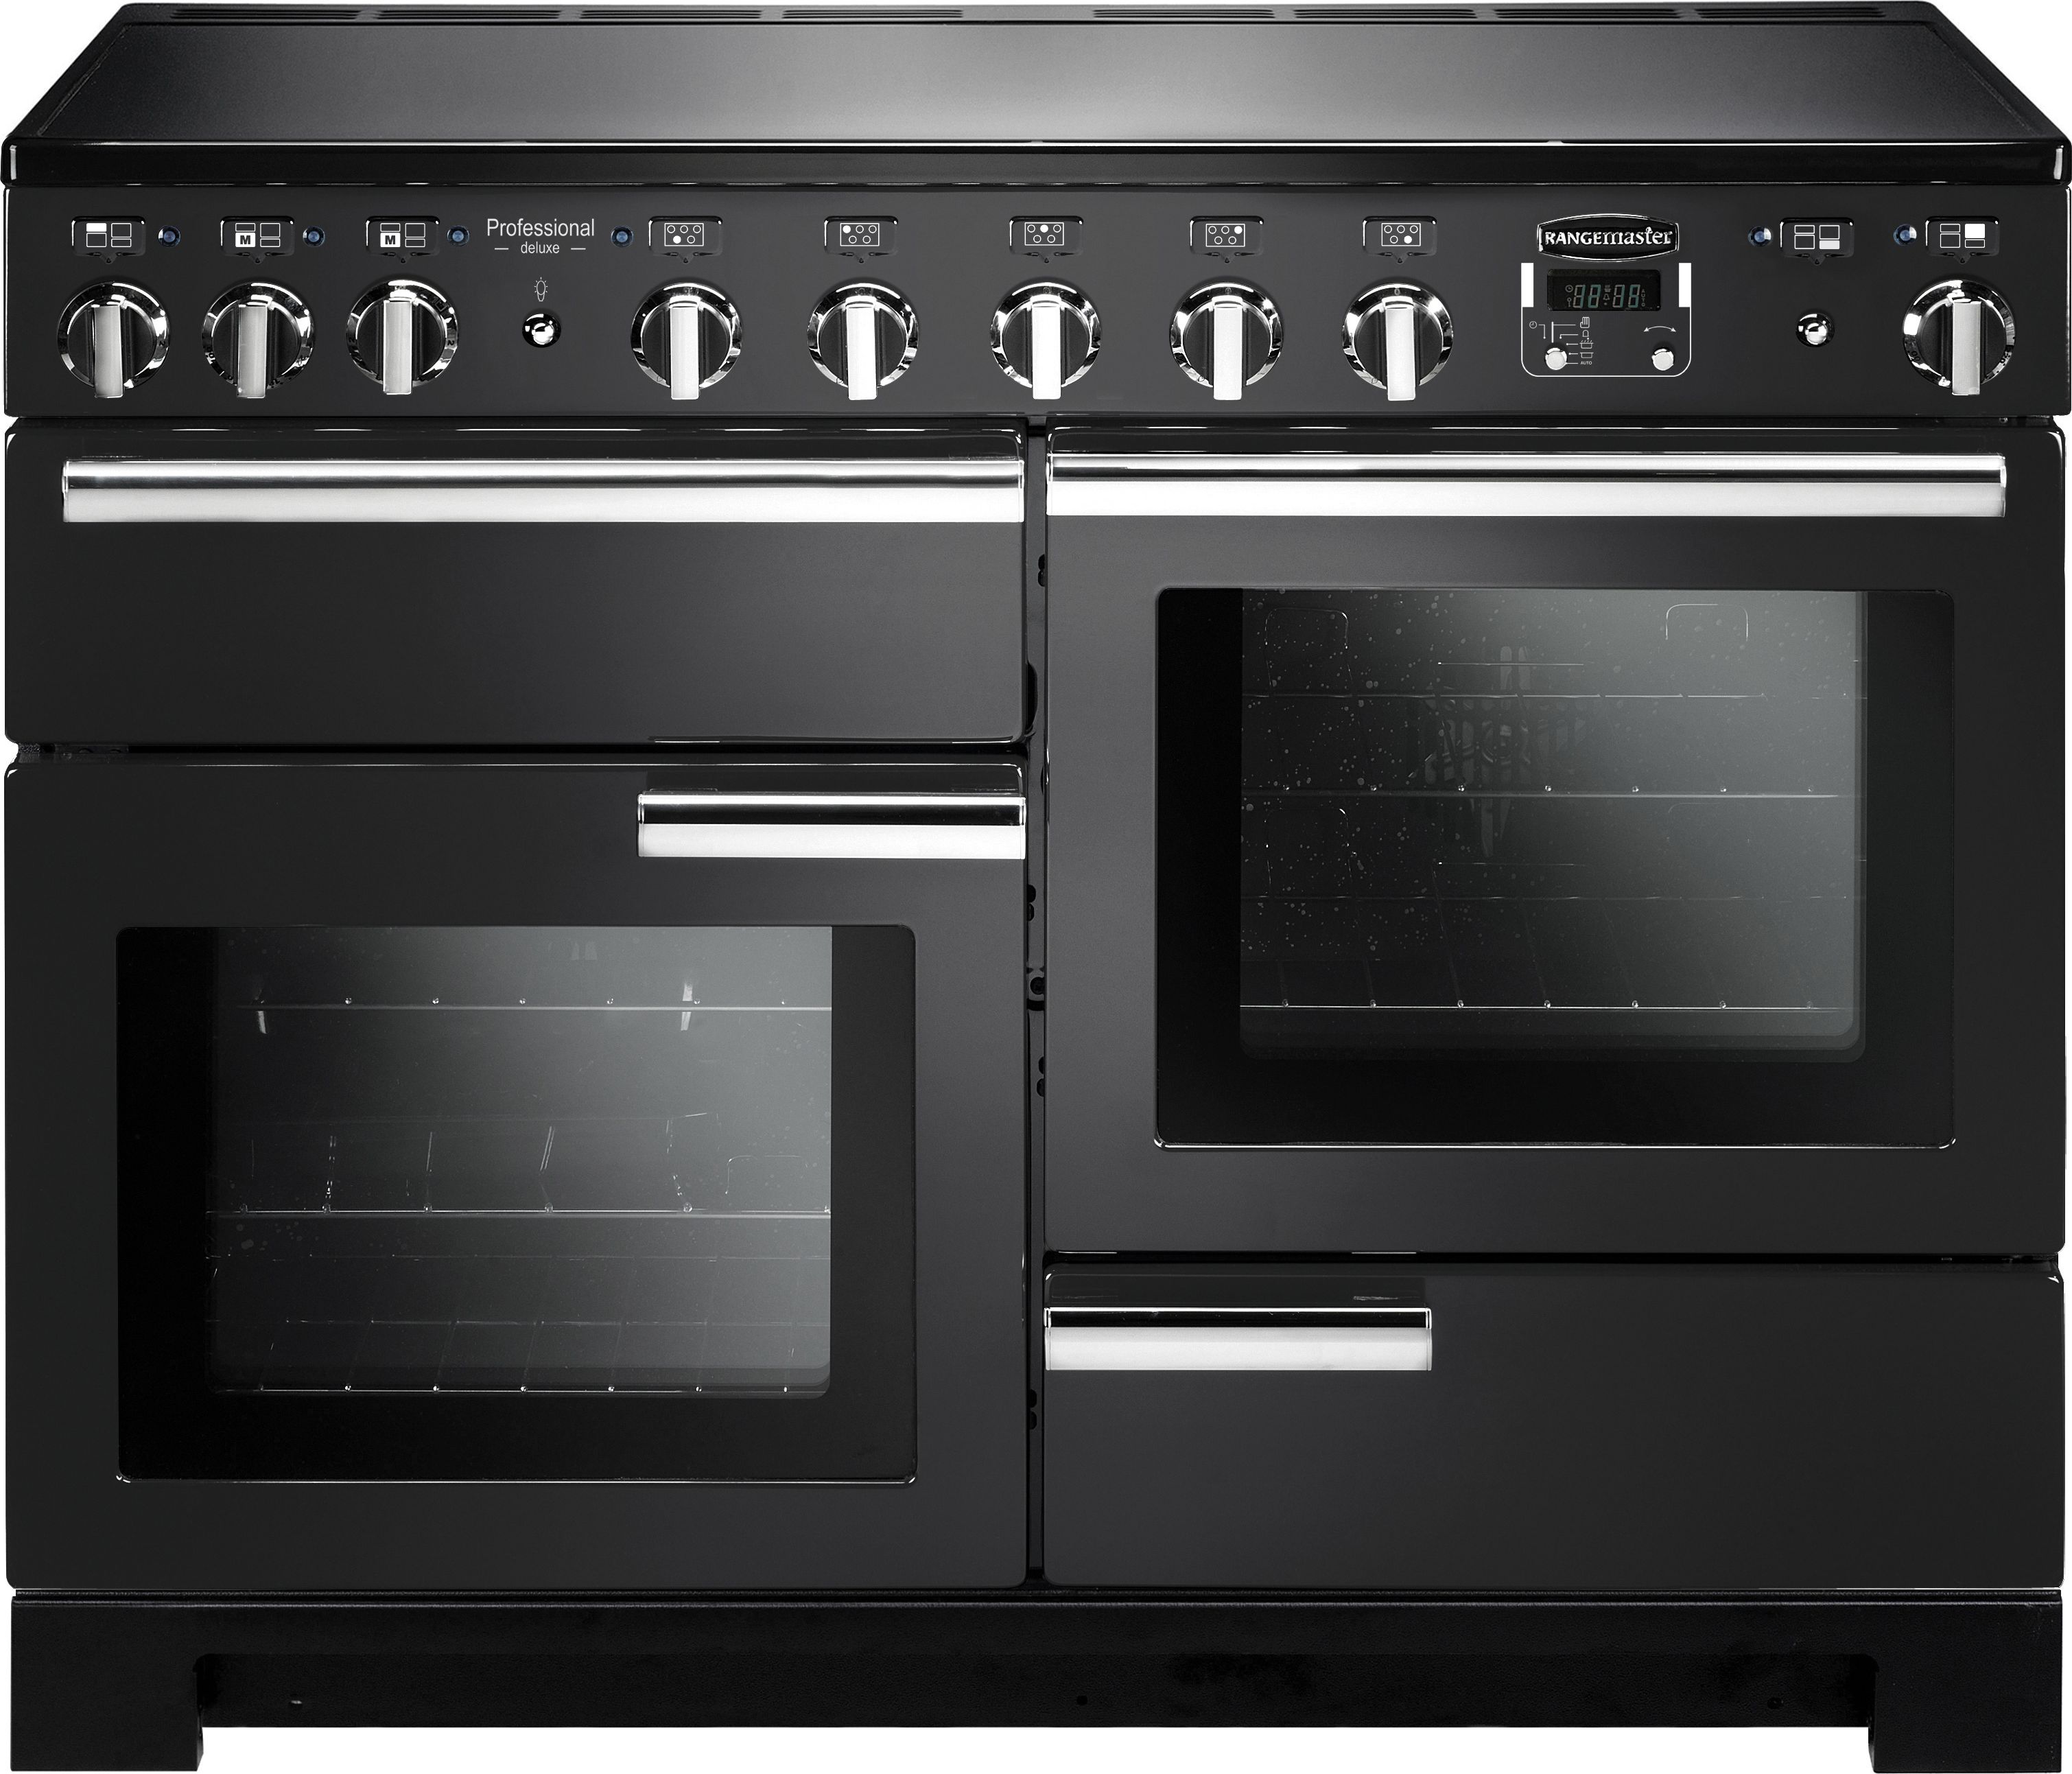 Rangemaster Professional Deluxe PDL110EICB/C 110cm Electric Range Cooker with Induction Hob - Charcoal Black - A/A/A Rated, Charcoal Black